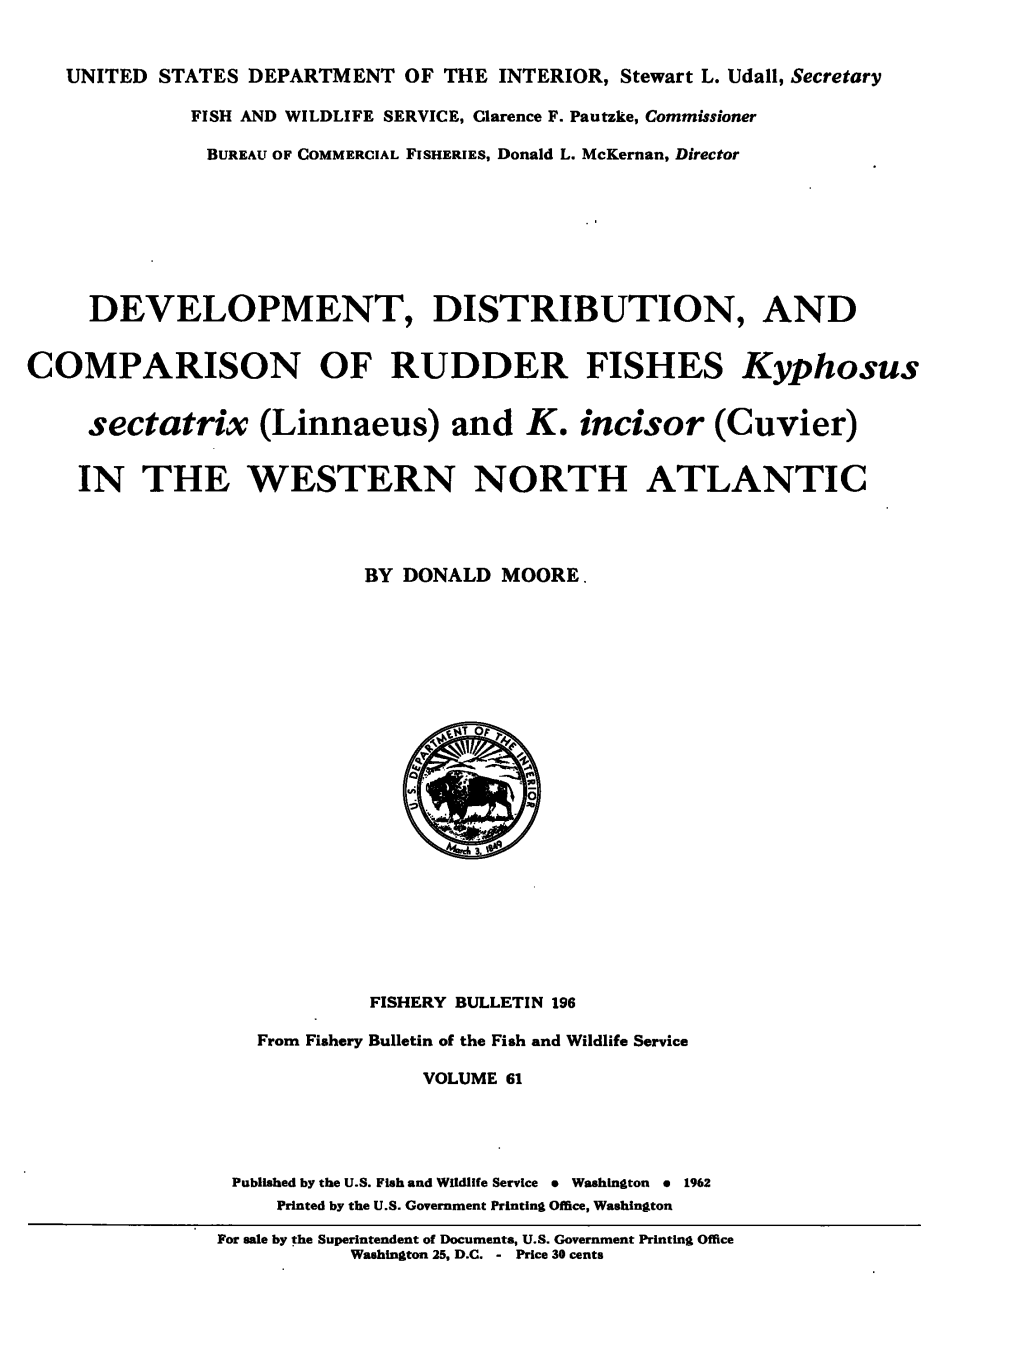 Fishery Bulletin of the Fish and Wildlife Service V.61